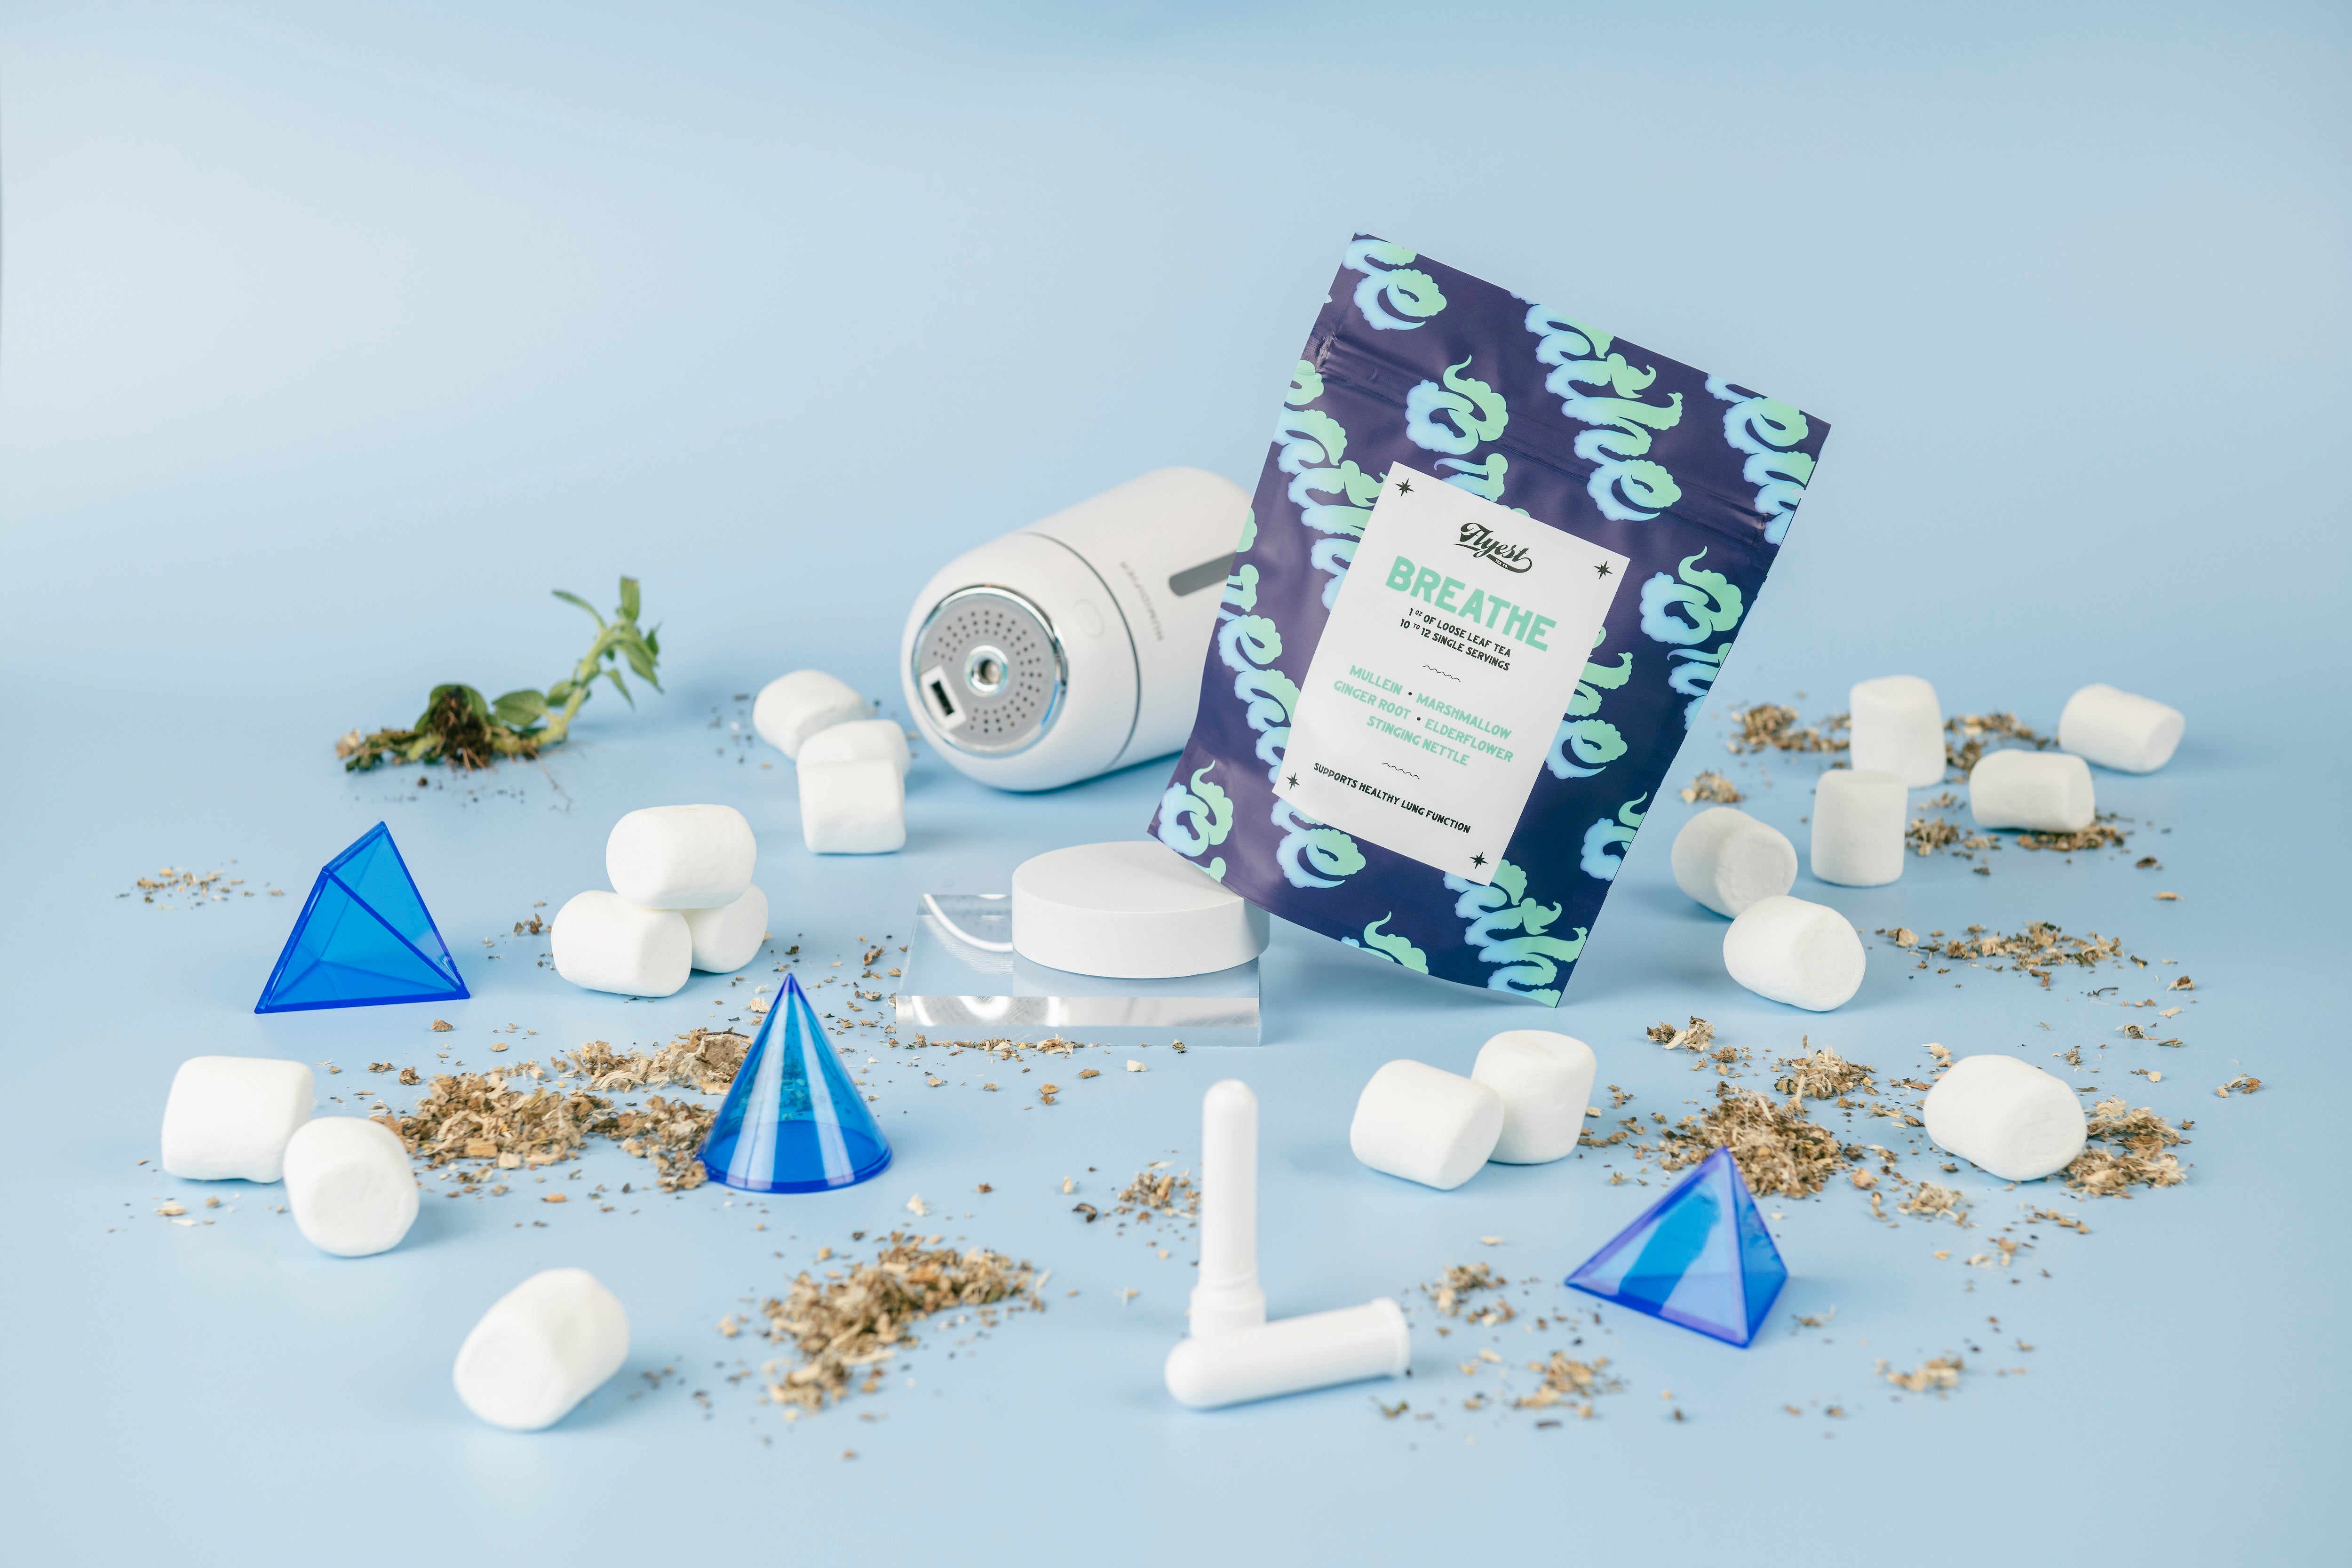 a bag of breathe tea, surrounded by marshmallows, asthma devices, blue triangles, and actual tea leaves.